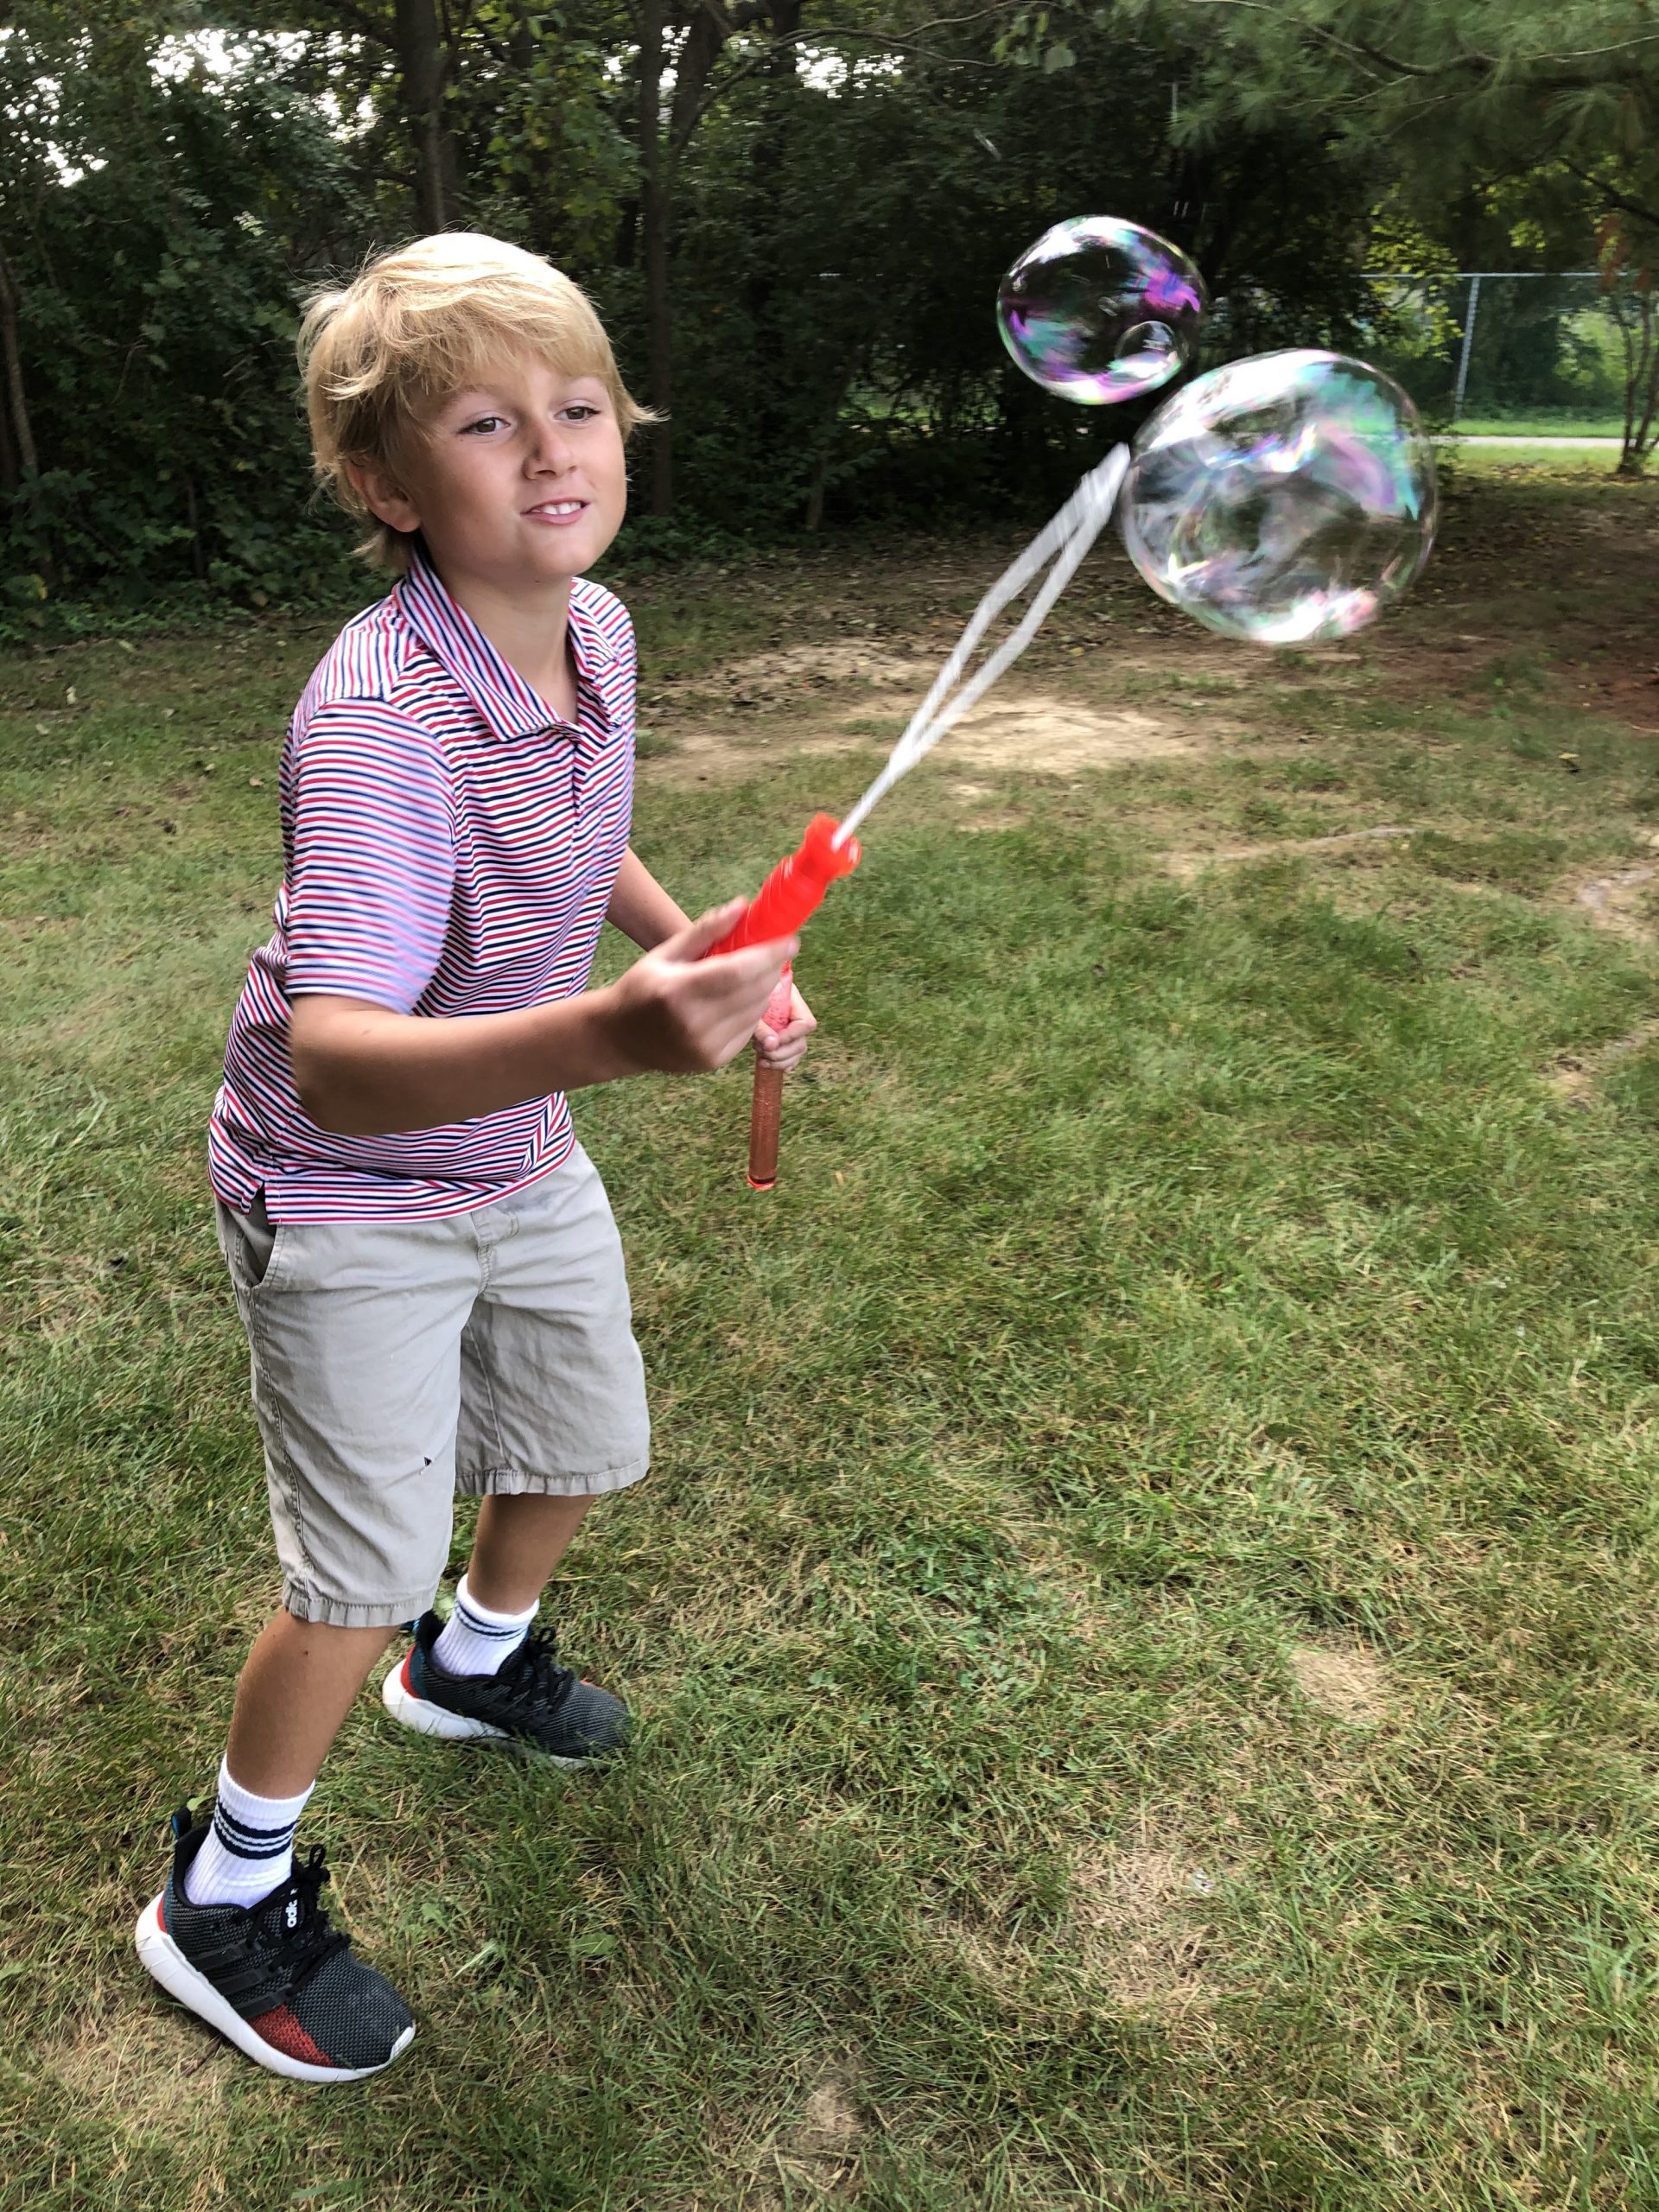 Student plays with bubbles